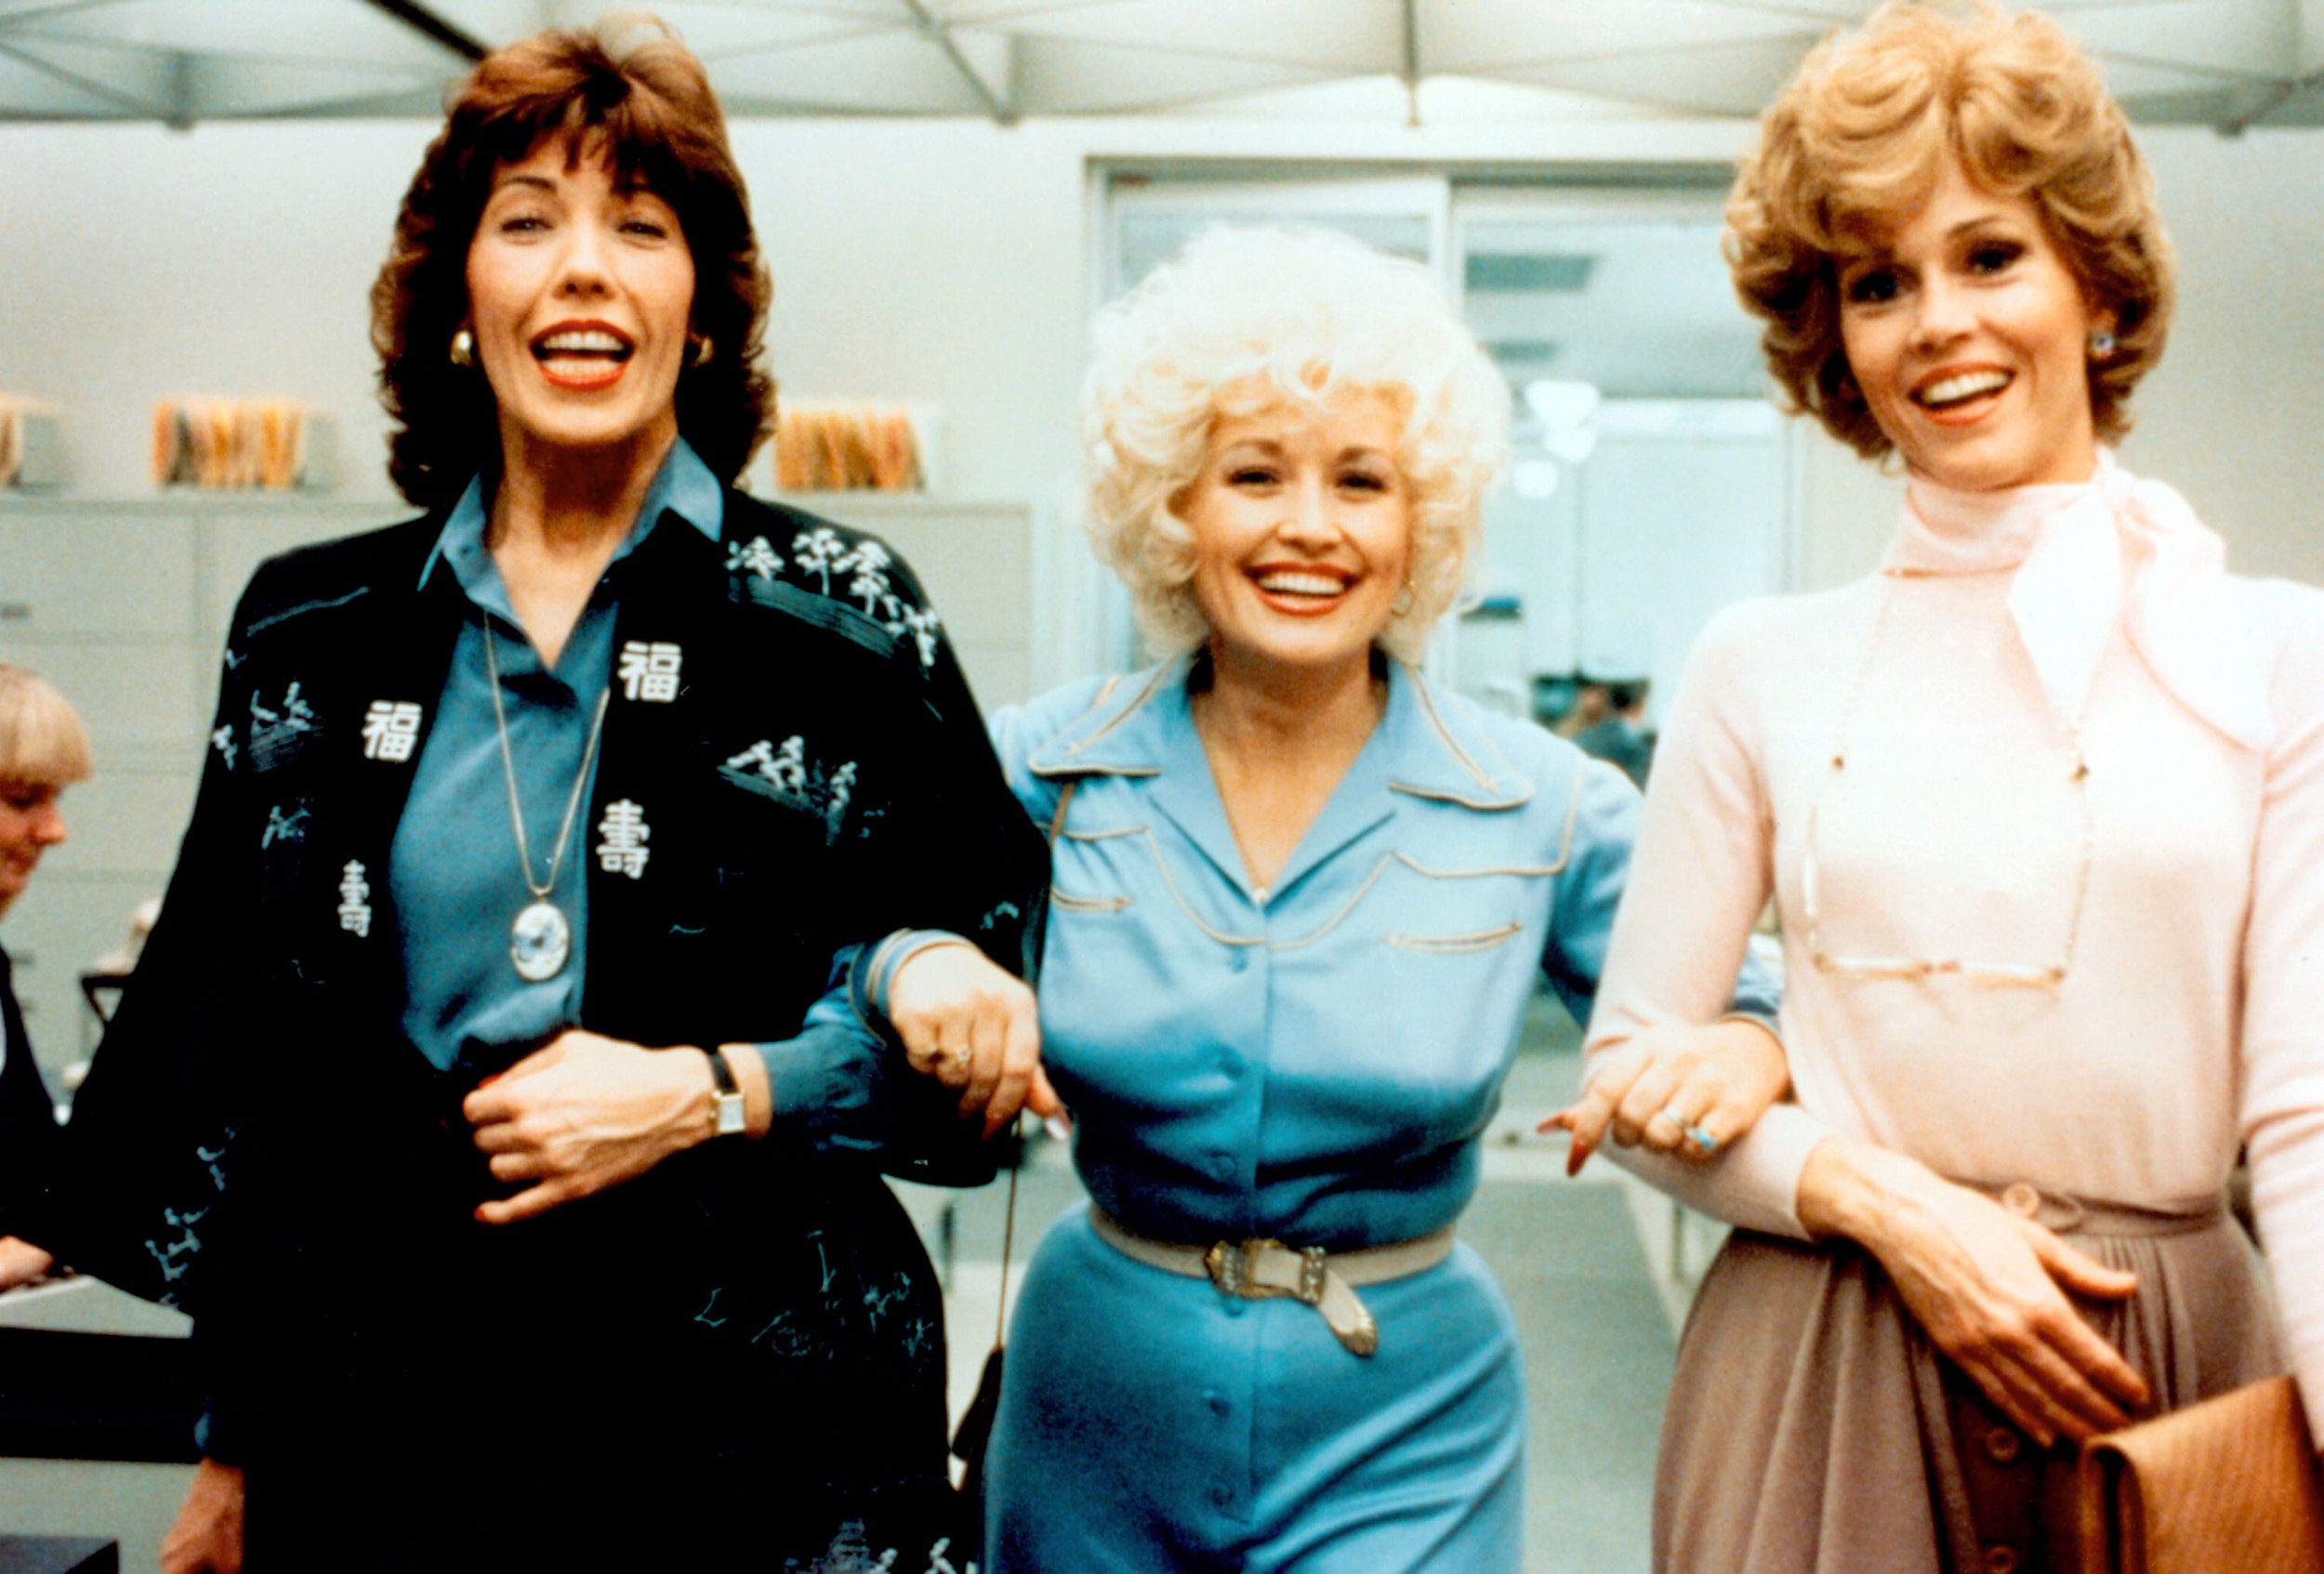 In the 1980 movie 9 to 5 with Lily Tomlin and Dolly Parton